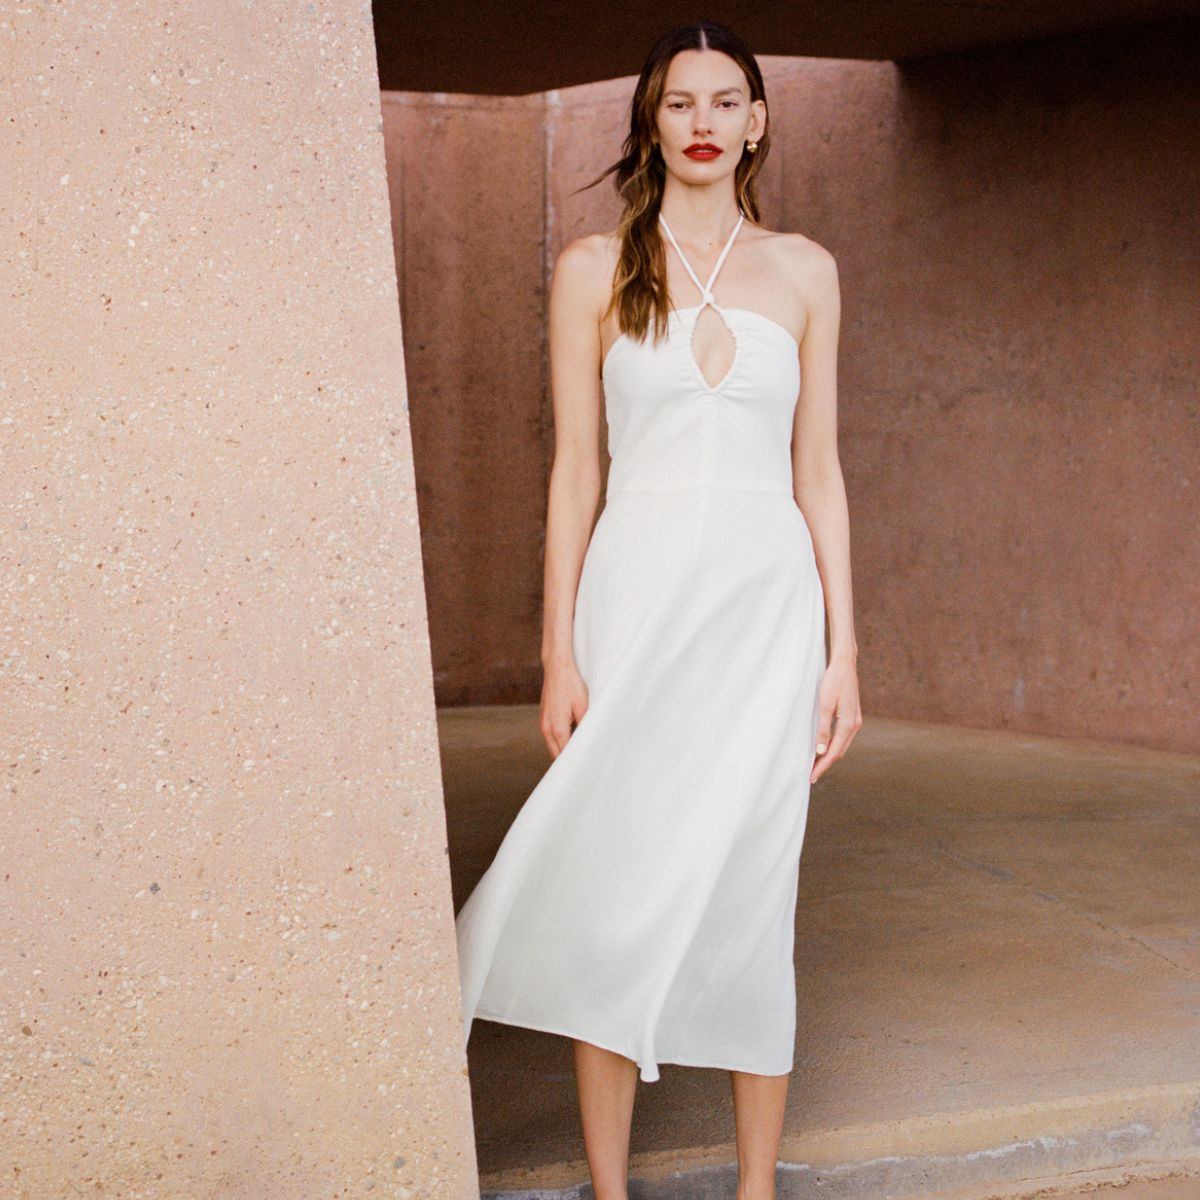 Everlane’s Latest Capsule Collection Is Chic, Stylish…